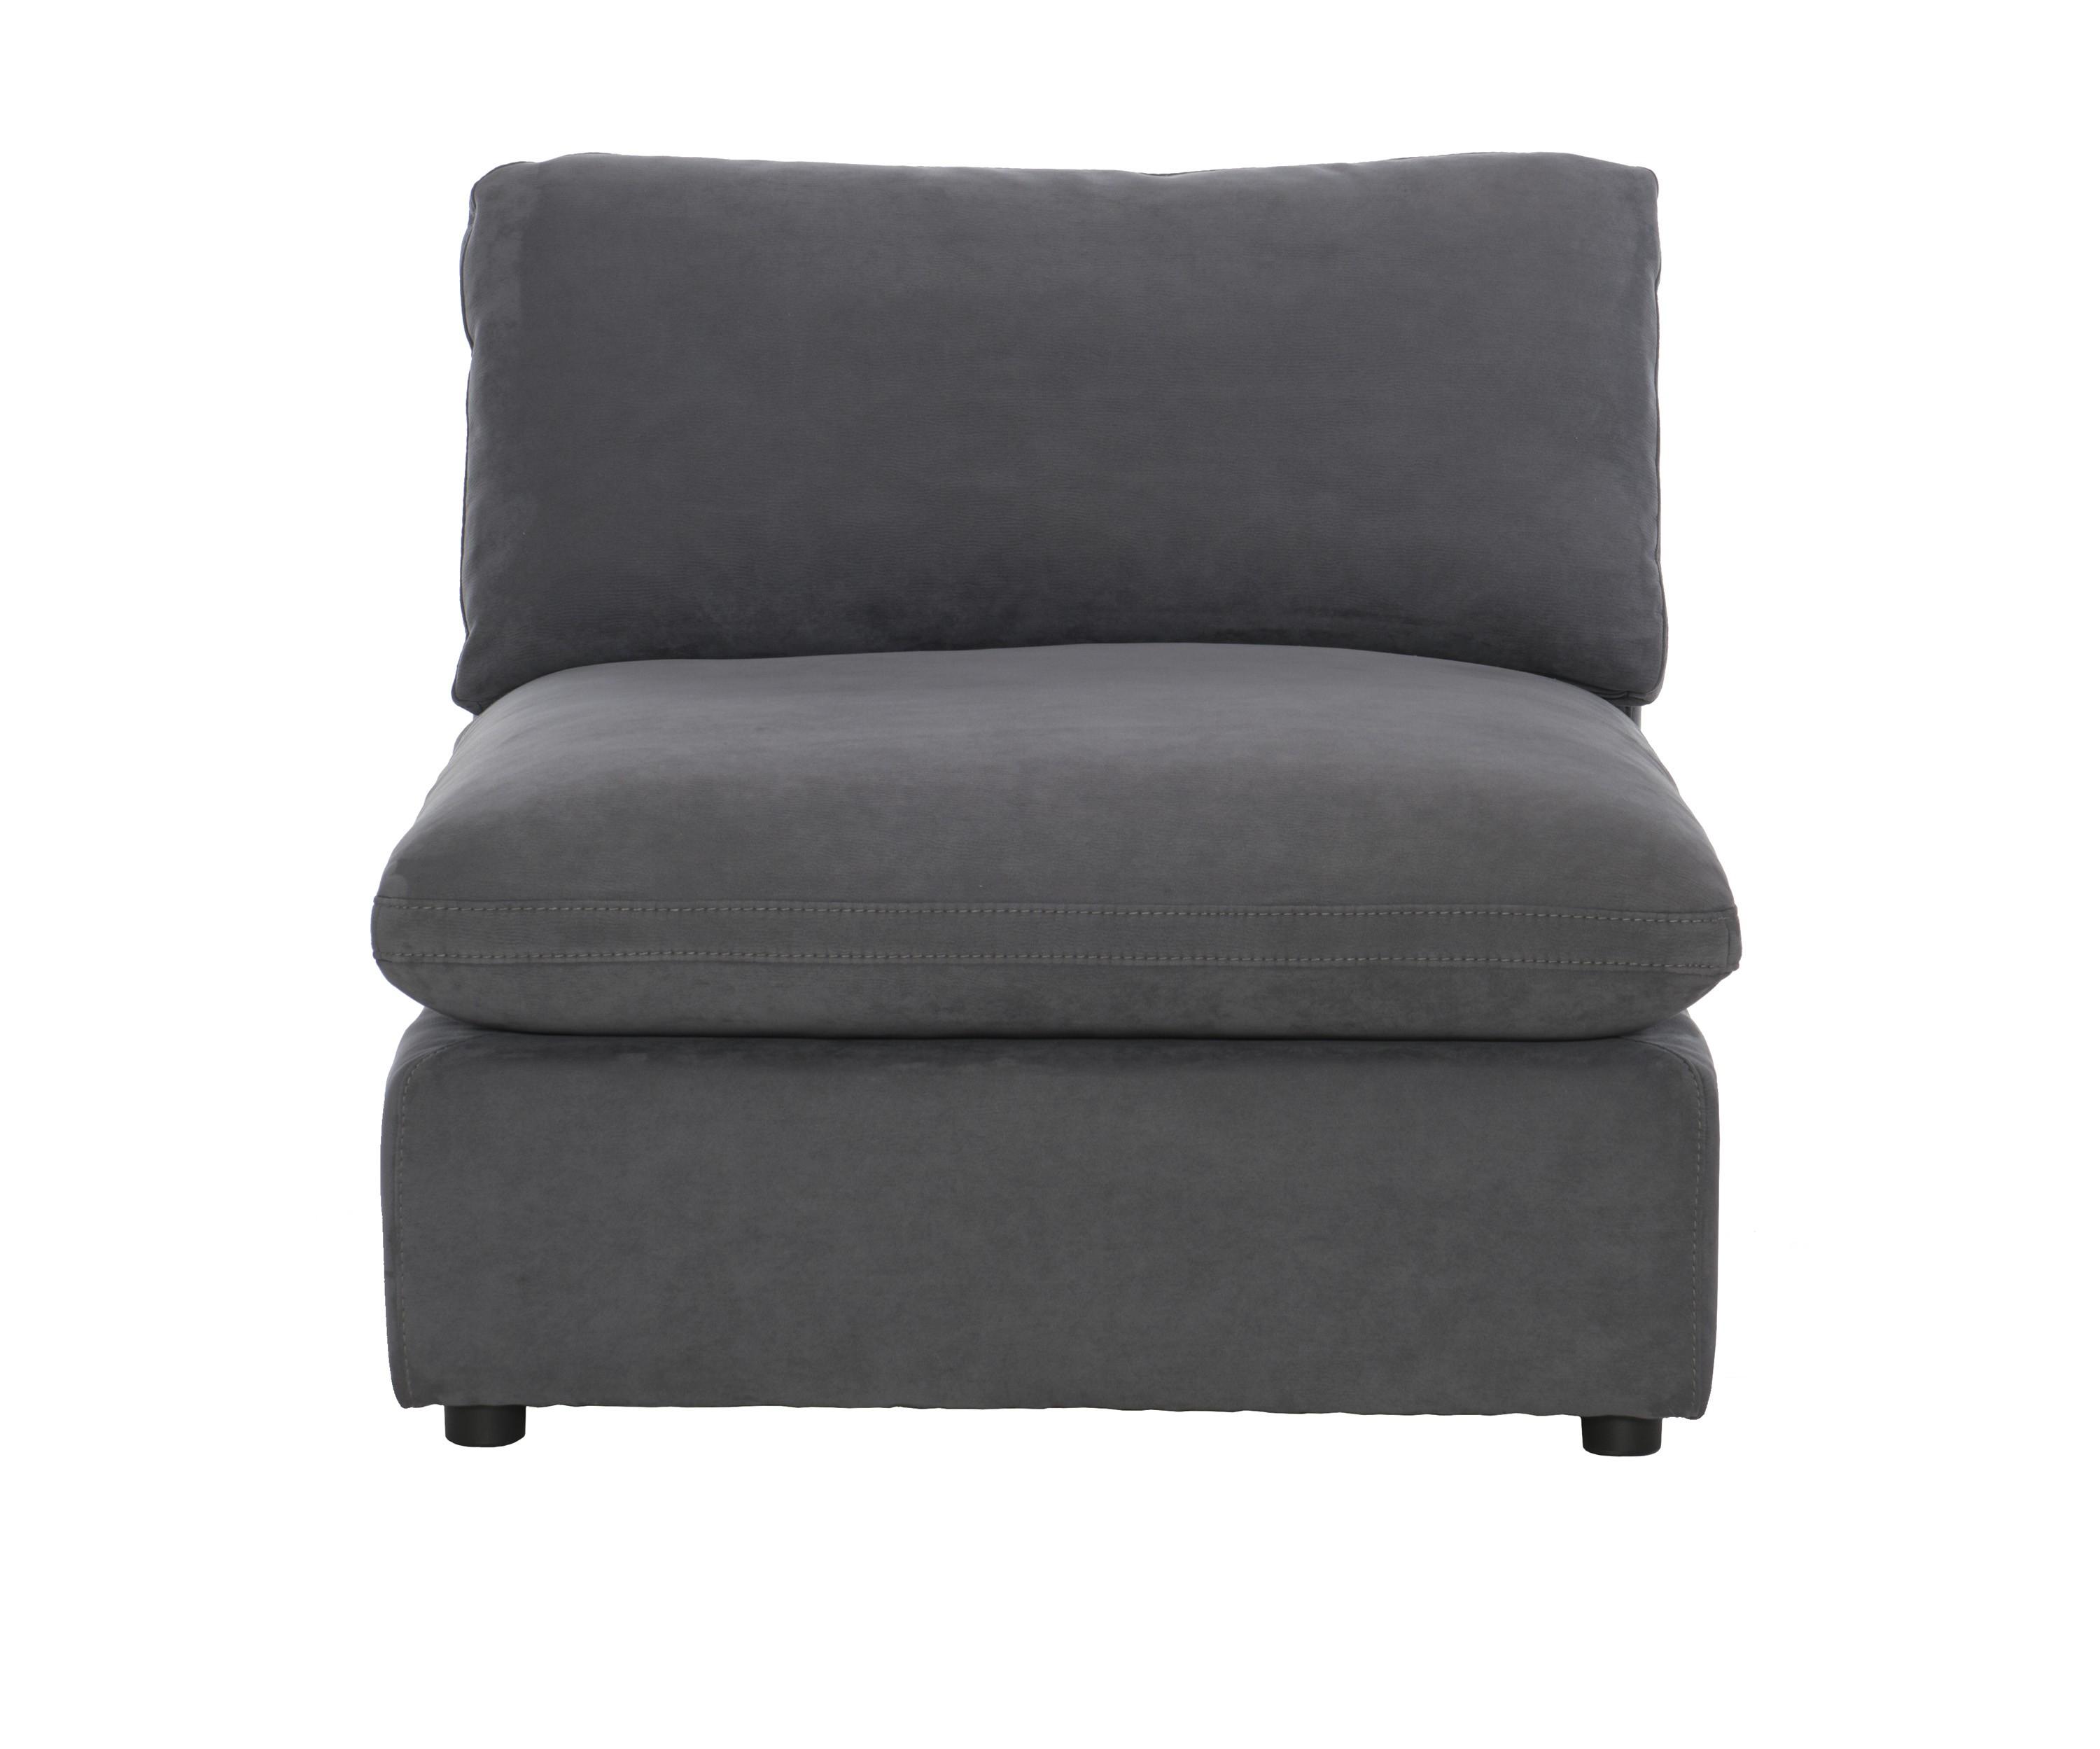 Transitional Armless Chair 9546GY-AC Guthrie 9546GY-AC in Gray Microfiber